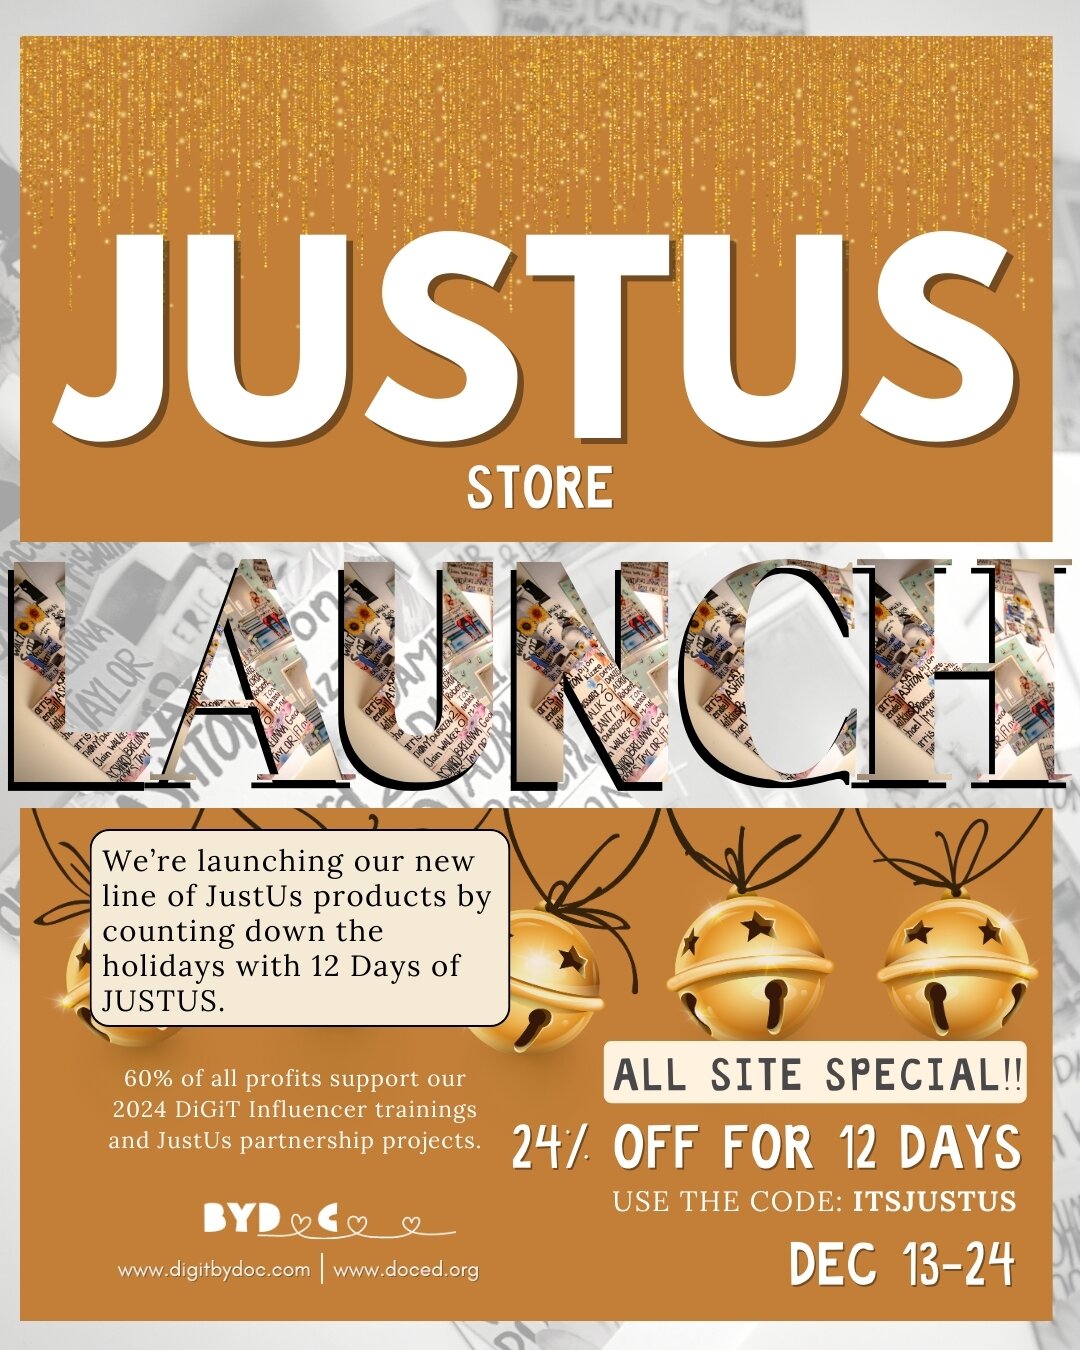 It&rsquo;s 12 days until #Xmas!! 🙌🏽🙌🏽 And we're counting down with 12 Days of JustUs.⁣
We&rsquo;re celebrating a decade of social justice outreach projects while launching our new line of #JustUs products.

Get your #journals #coffeecups #tumbler